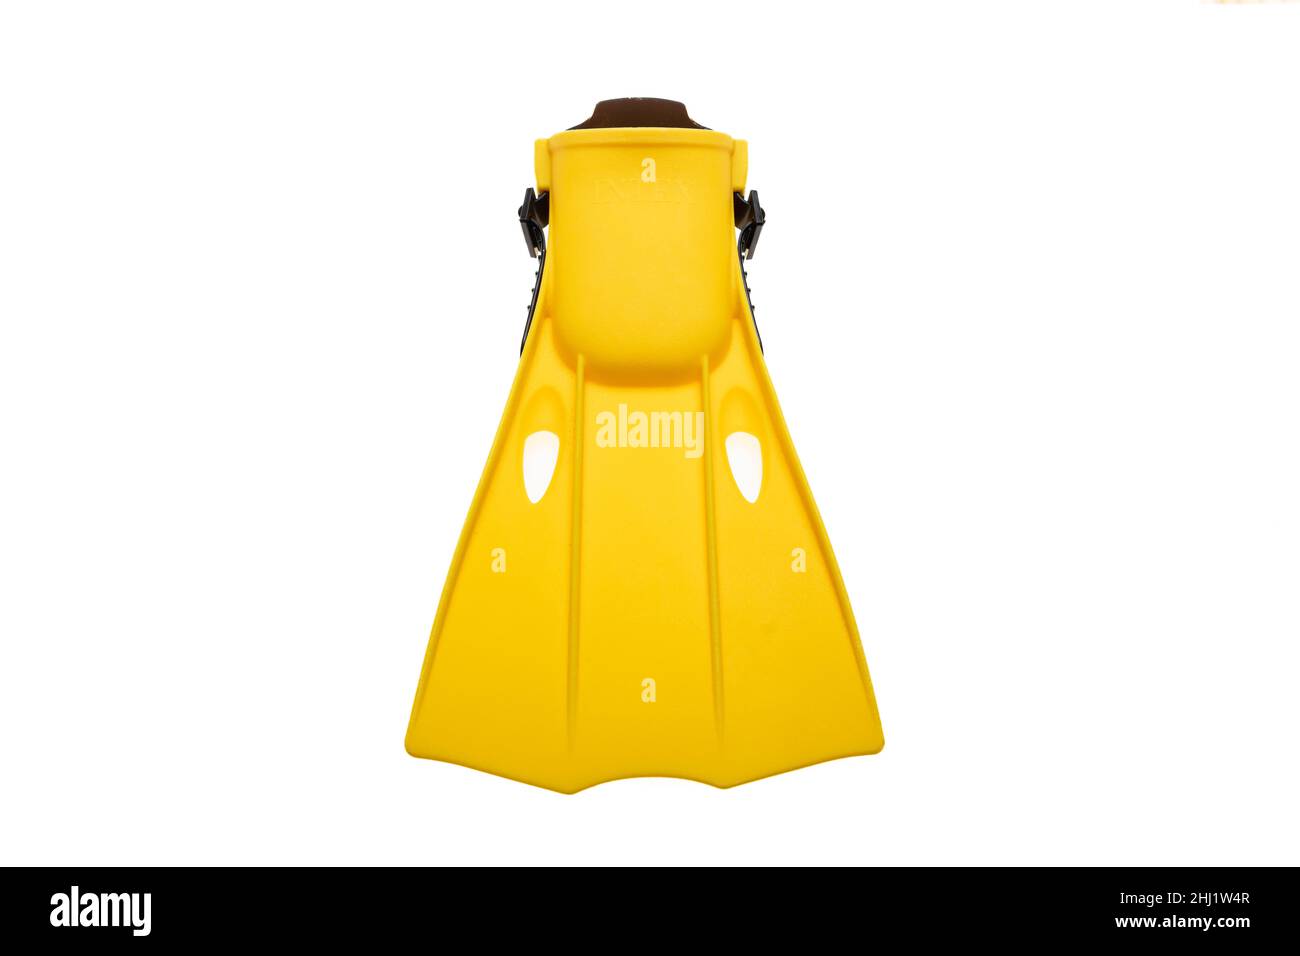 Flipper yellow isolated cutout on white background. Overhead view of fin footwear, swim and dive sea equipment. Sport, activity, leisure. Stock Photo